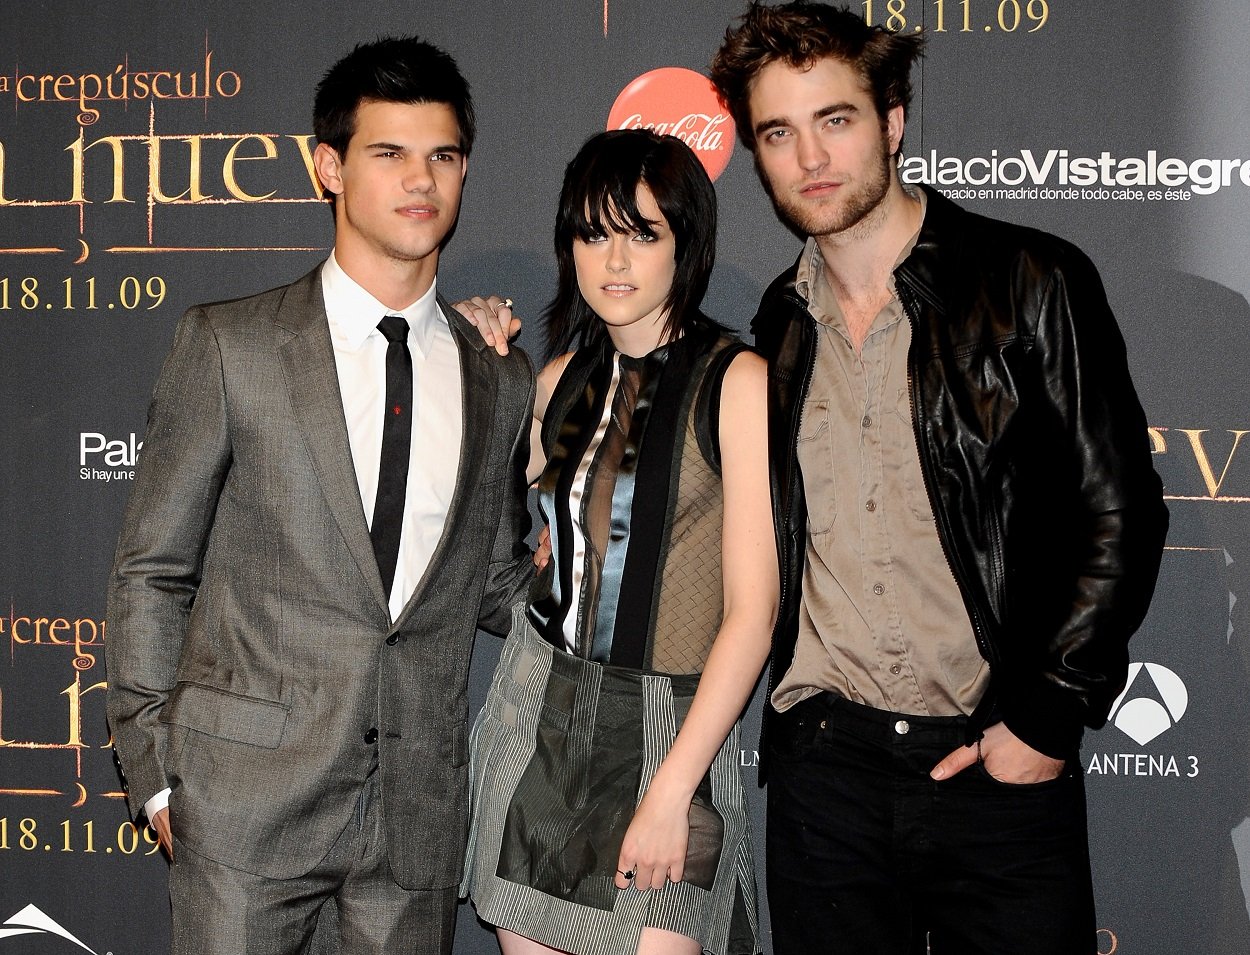 Twilight': How Much Money Did 5 Movies